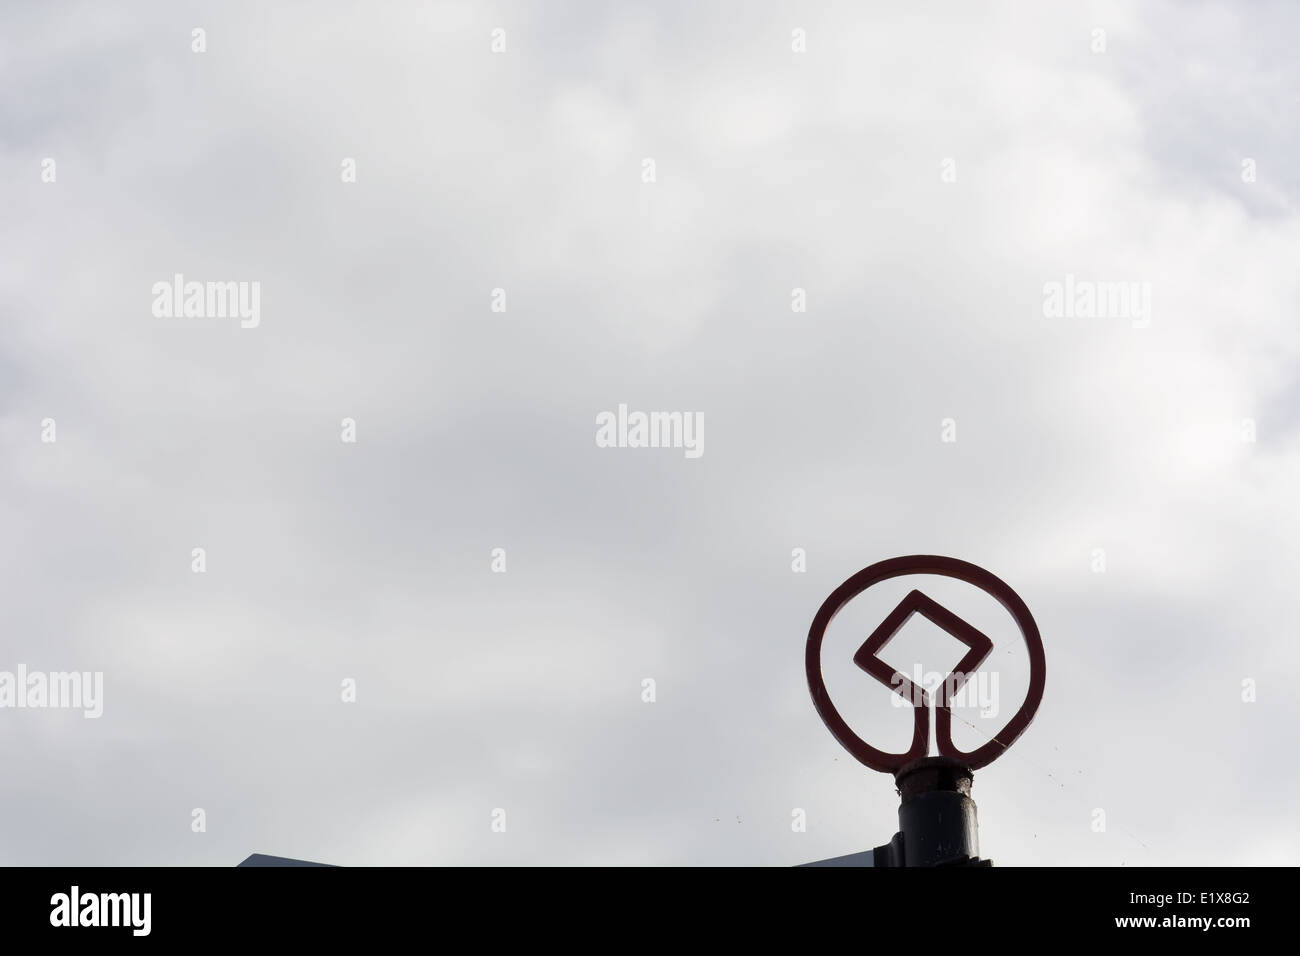 World heritage sign symbol made out of metal in Karlskrona, Sweden Stock Photo